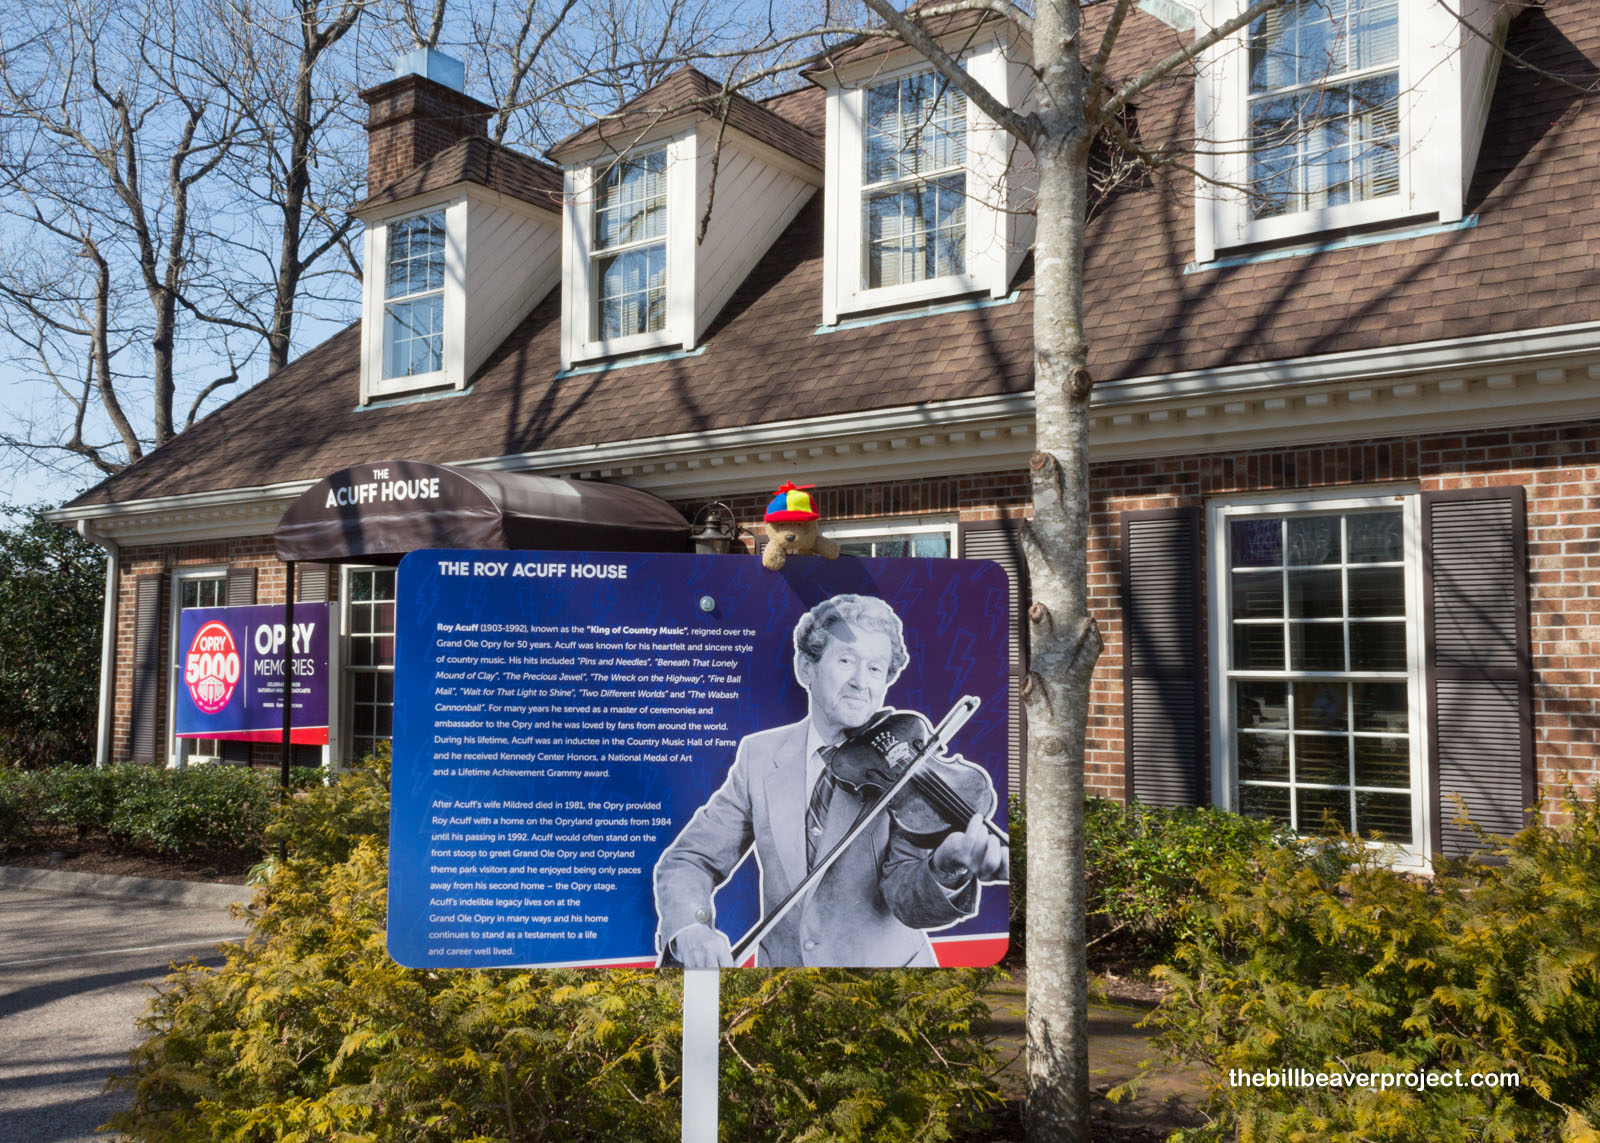 Early performer Roy Acuff lived out his last days here at the Opry!